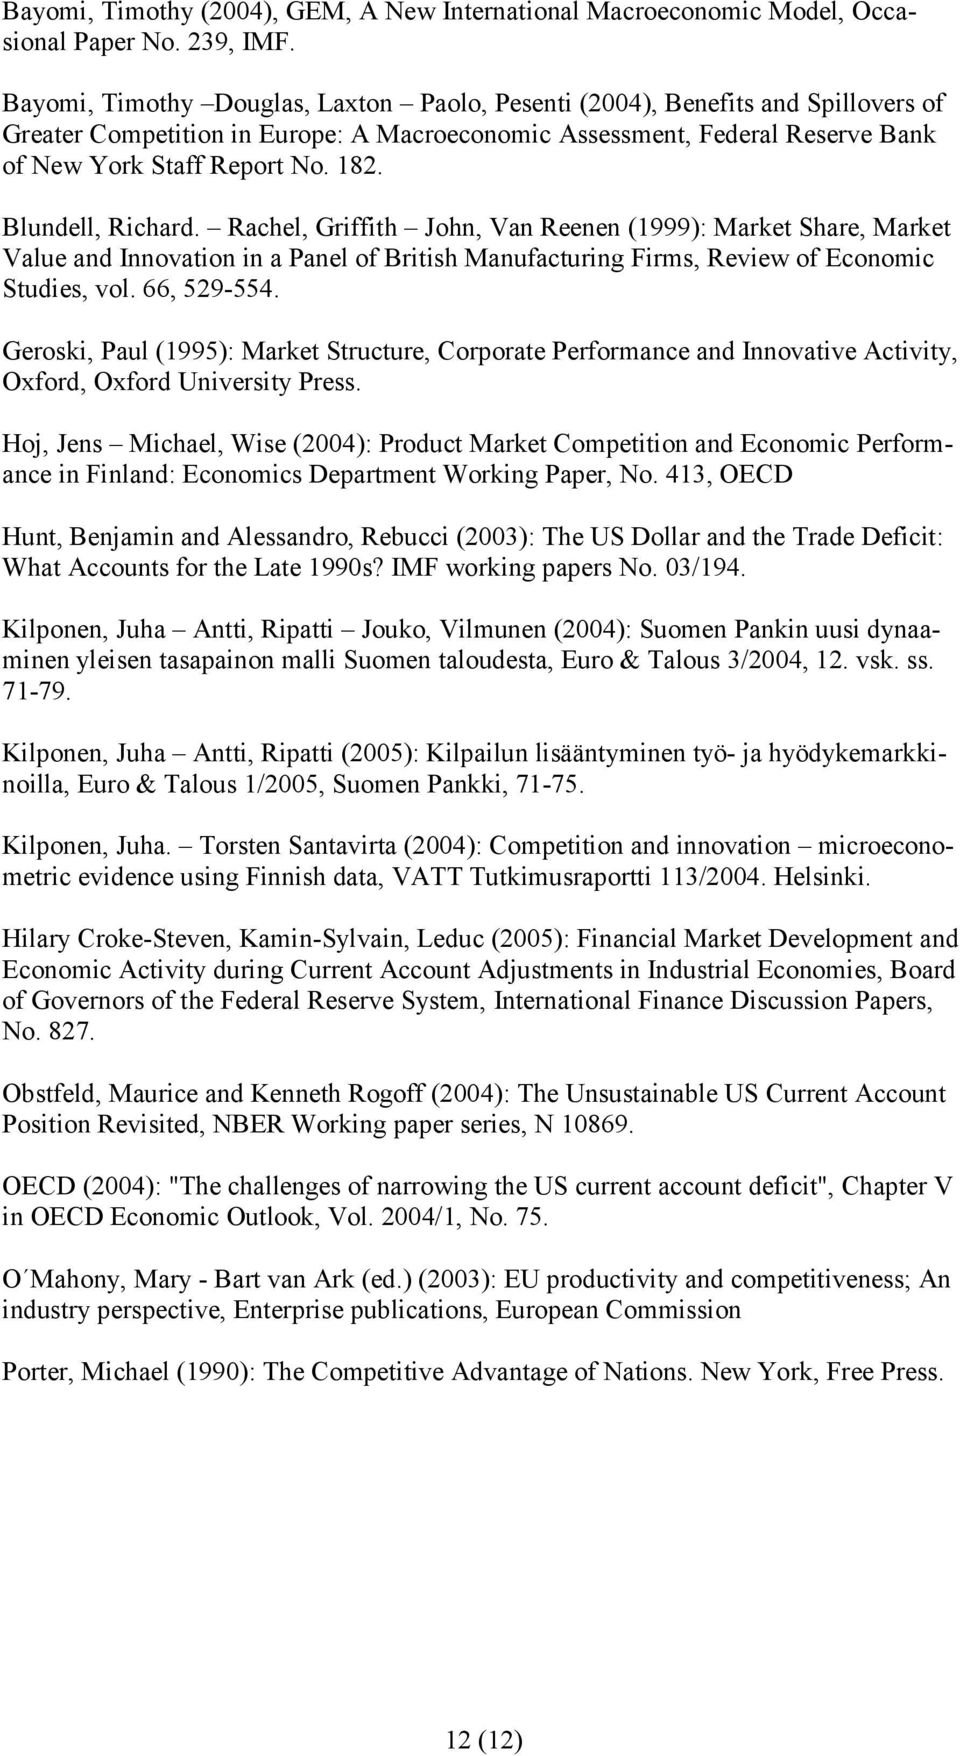 Blundell, Richard. Rachel, Griffith John, Van Reenen (1999): Market Share, Market Value and Innovation in a Panel of British Manufacturing Firms, Review of Economic Studies, vol. 66, 529-554.